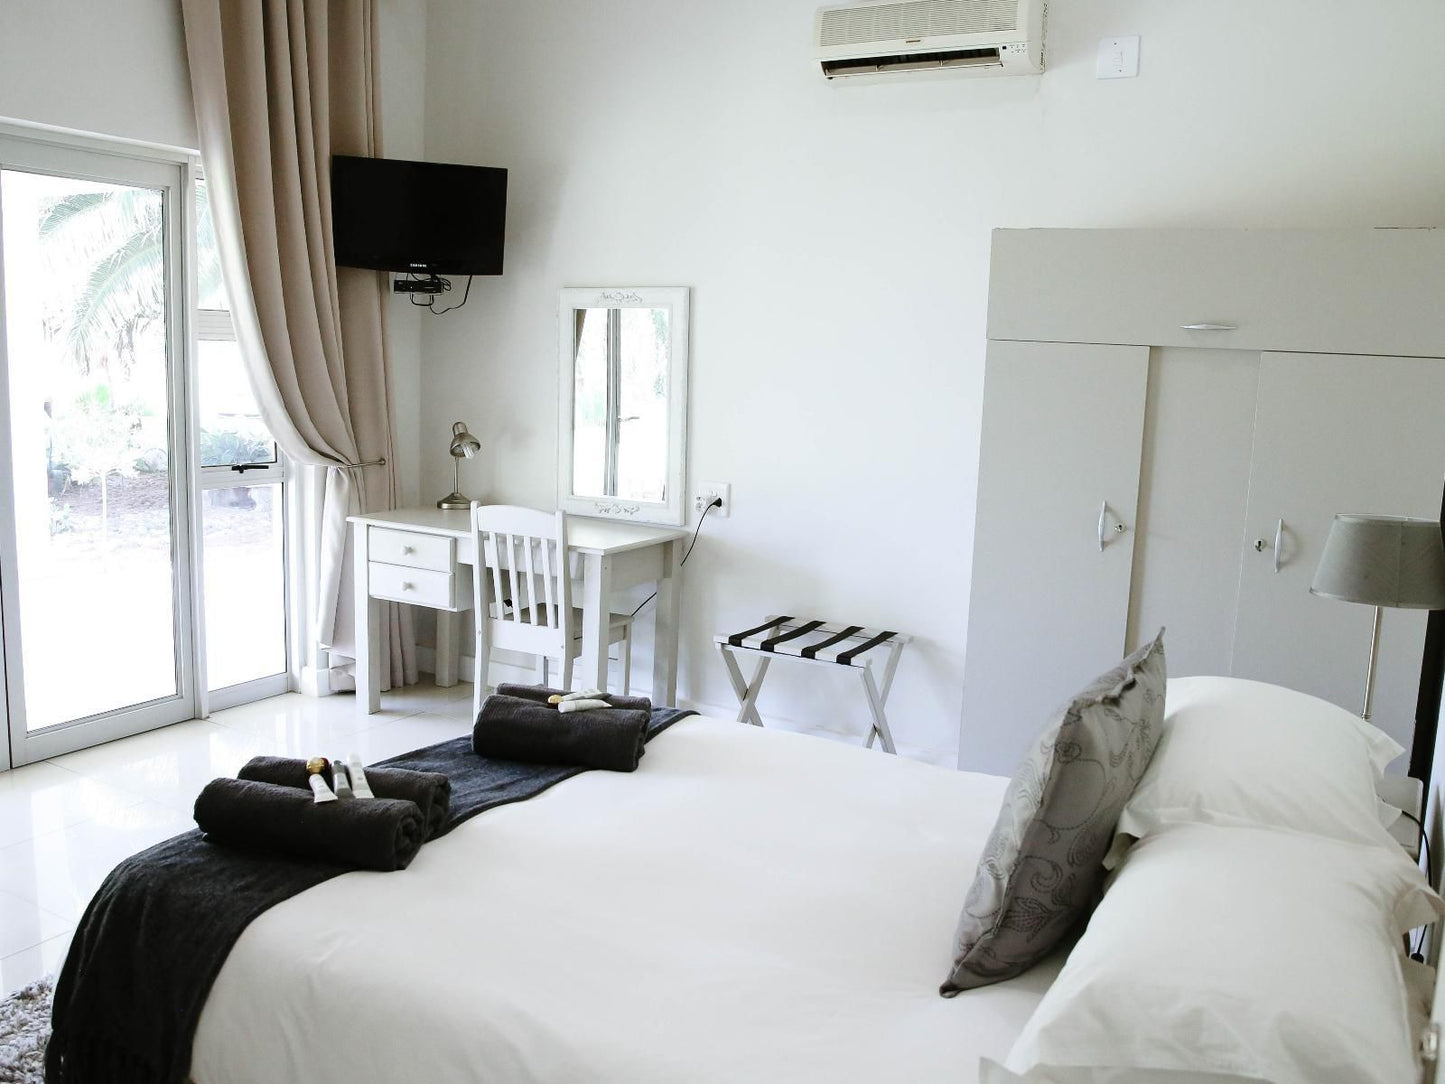 Mecca Guest House Hotazel Northern Cape South Africa Unsaturated, Bedroom